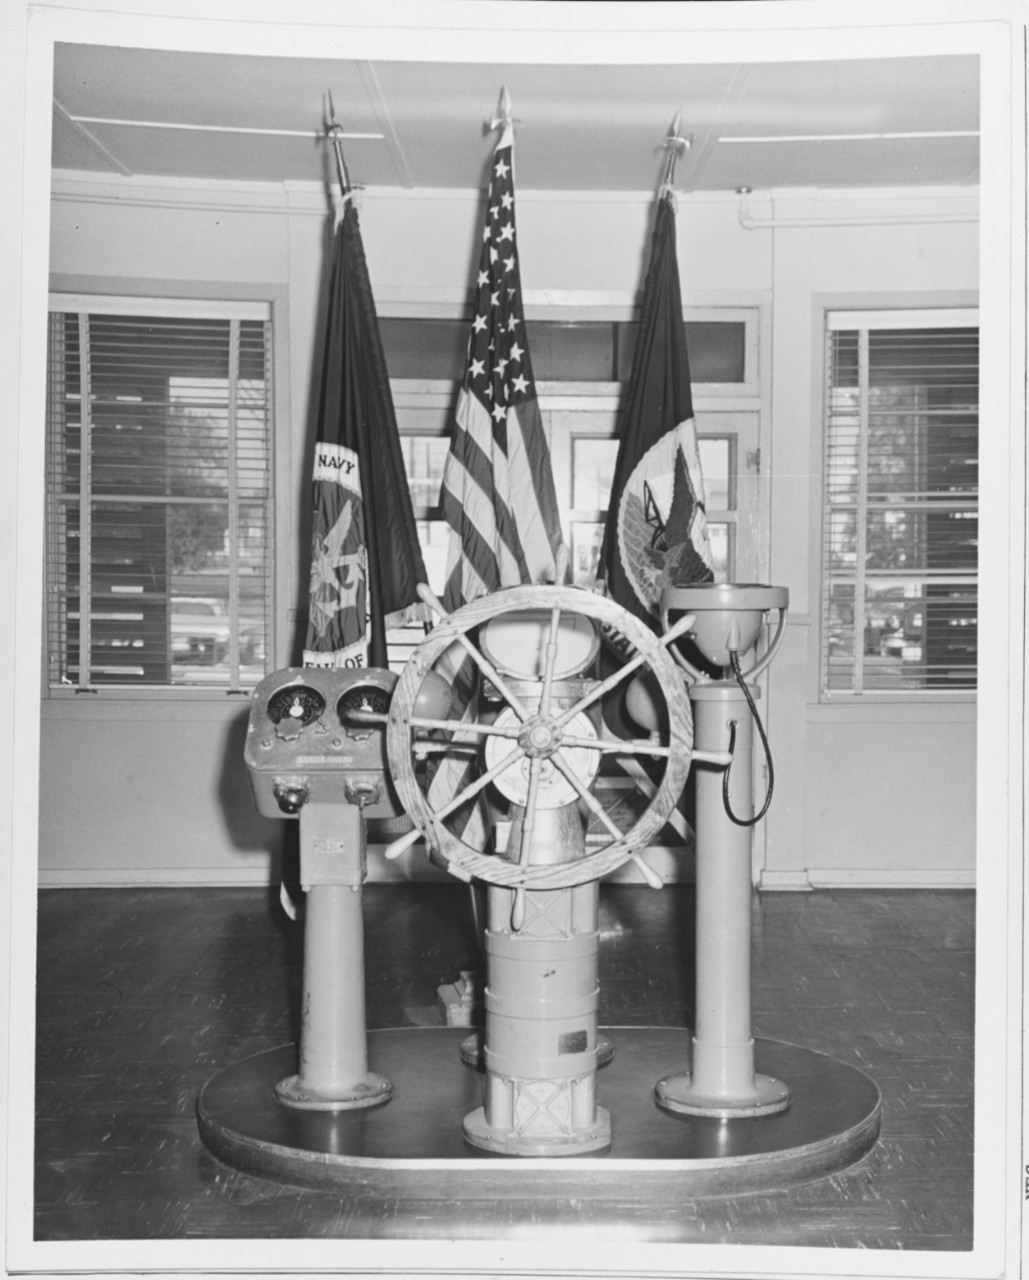 Display on Quarterdeck of Building S-1, Naval Air Station, Memphis